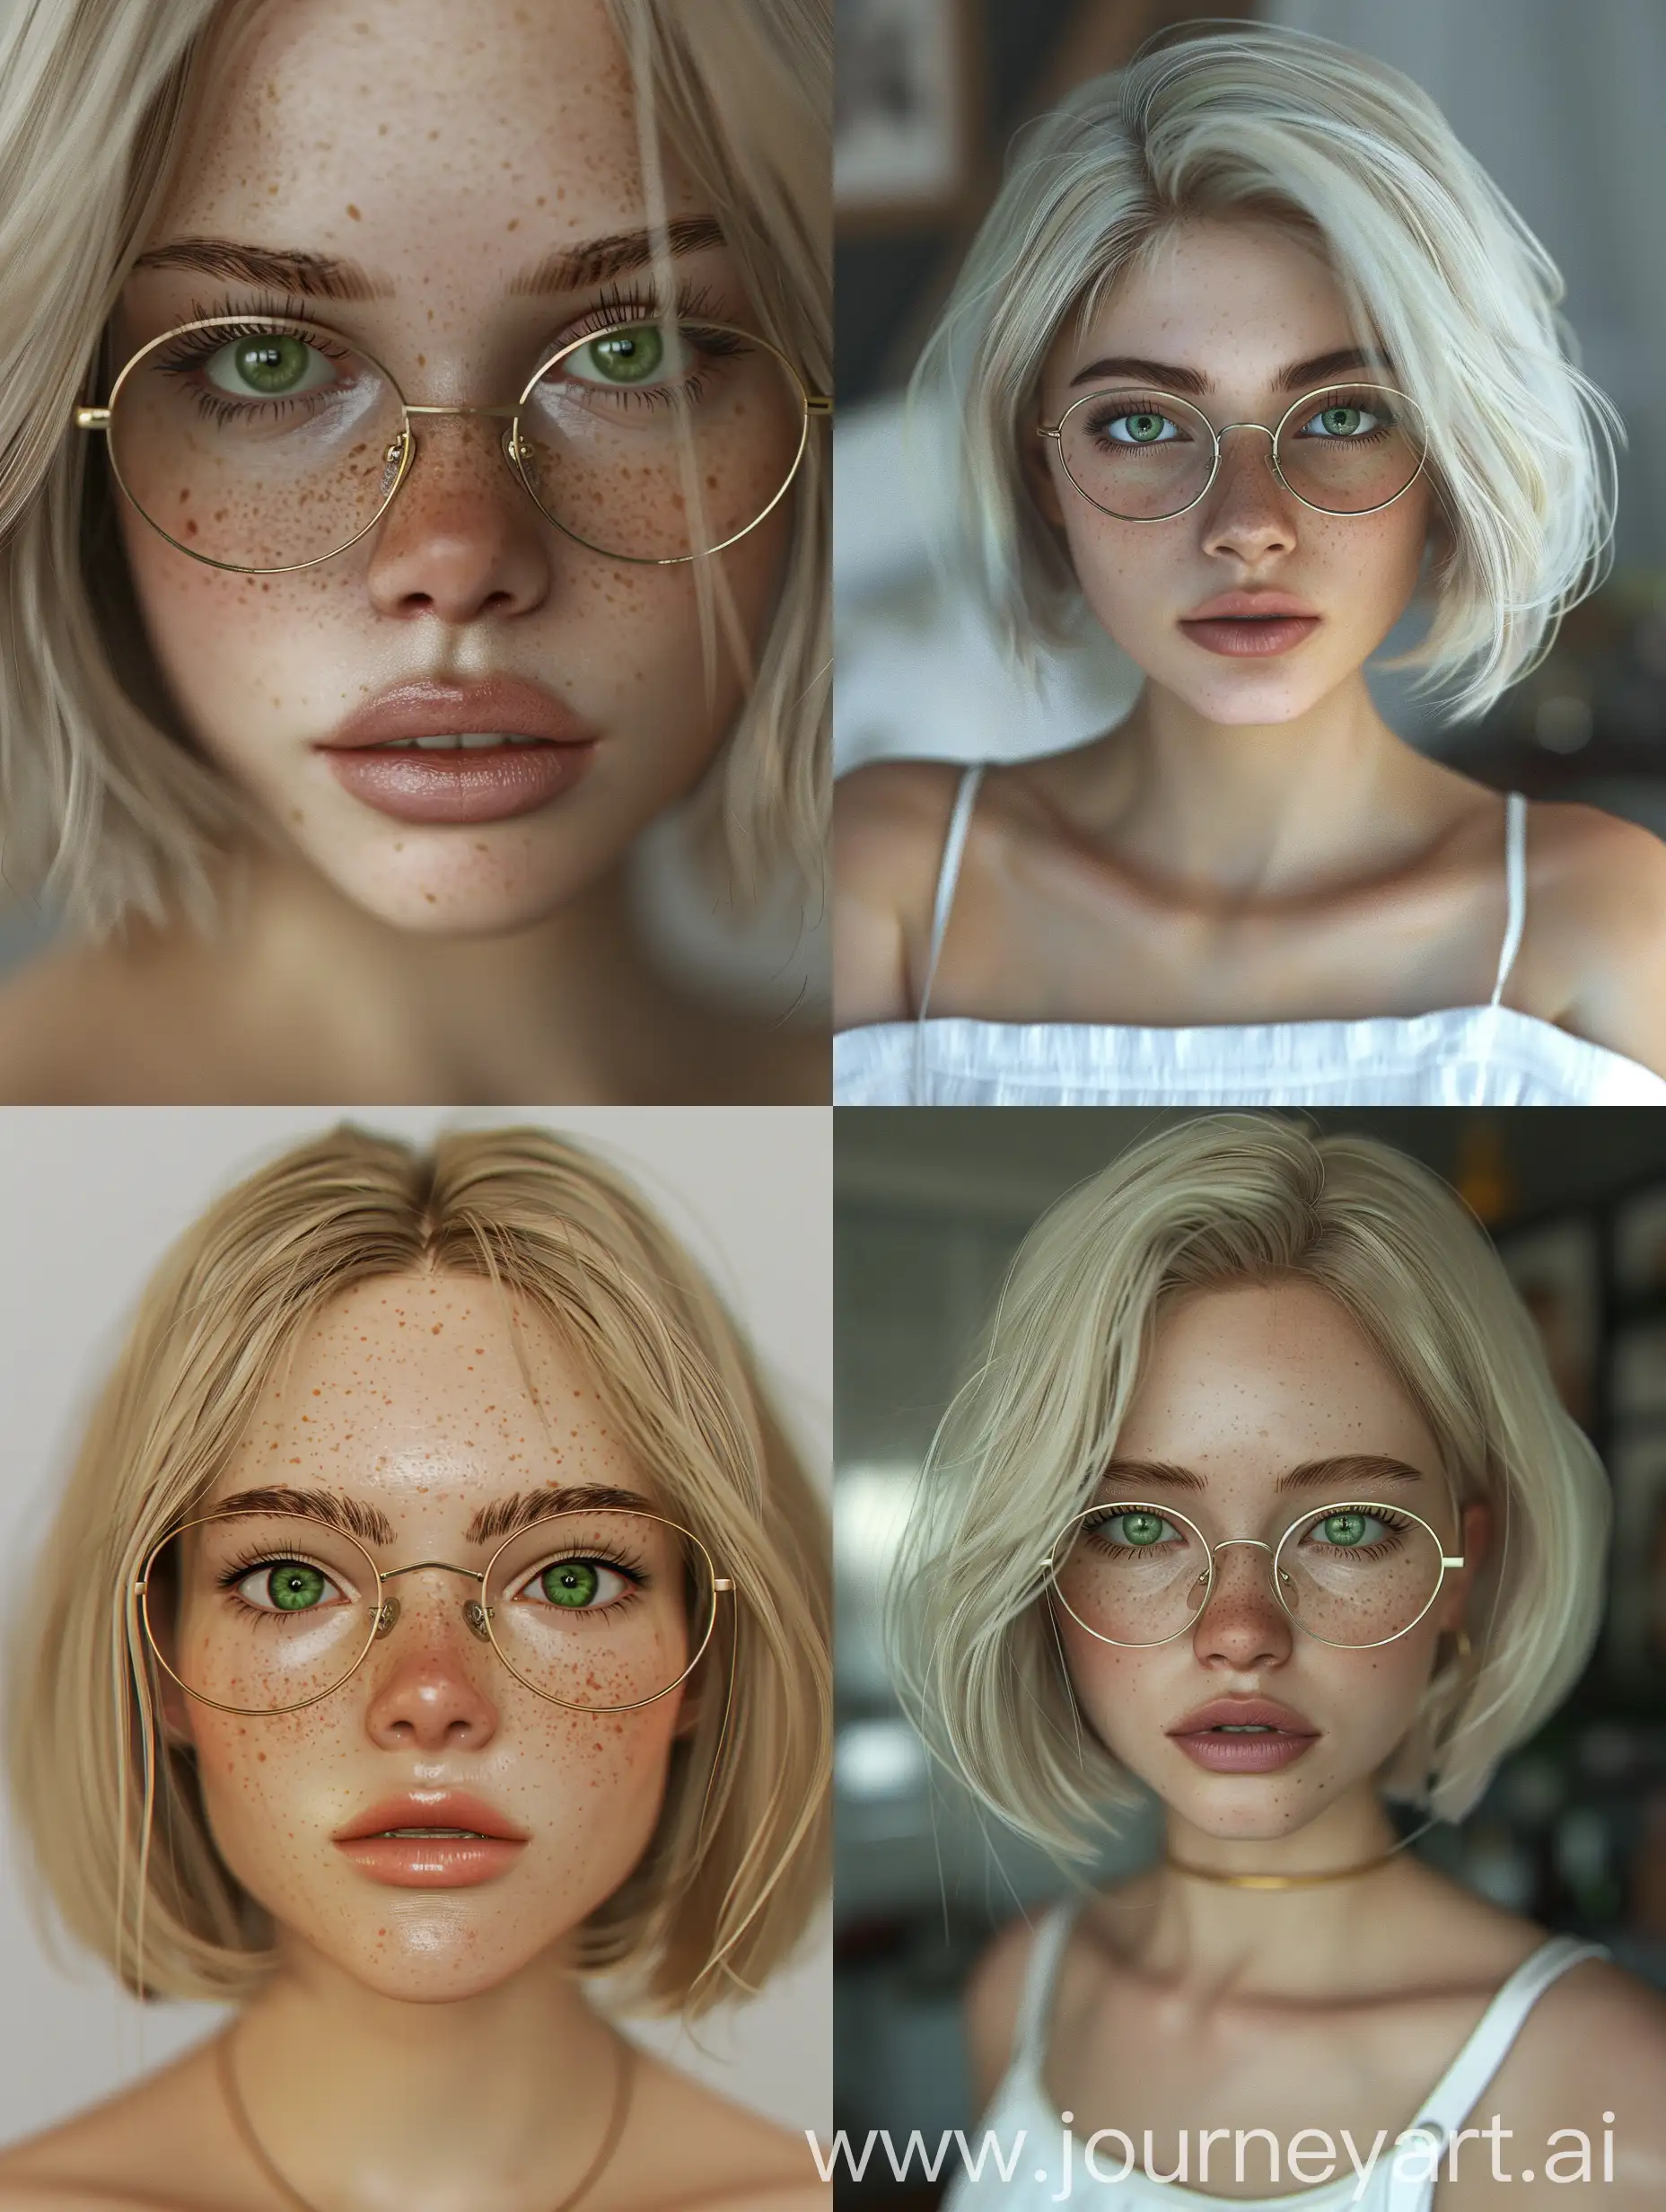 Captivating-American-Teen-Influencer-Blonde-Beauty-with-Almond-Eyes-and-Bobbed-Hair